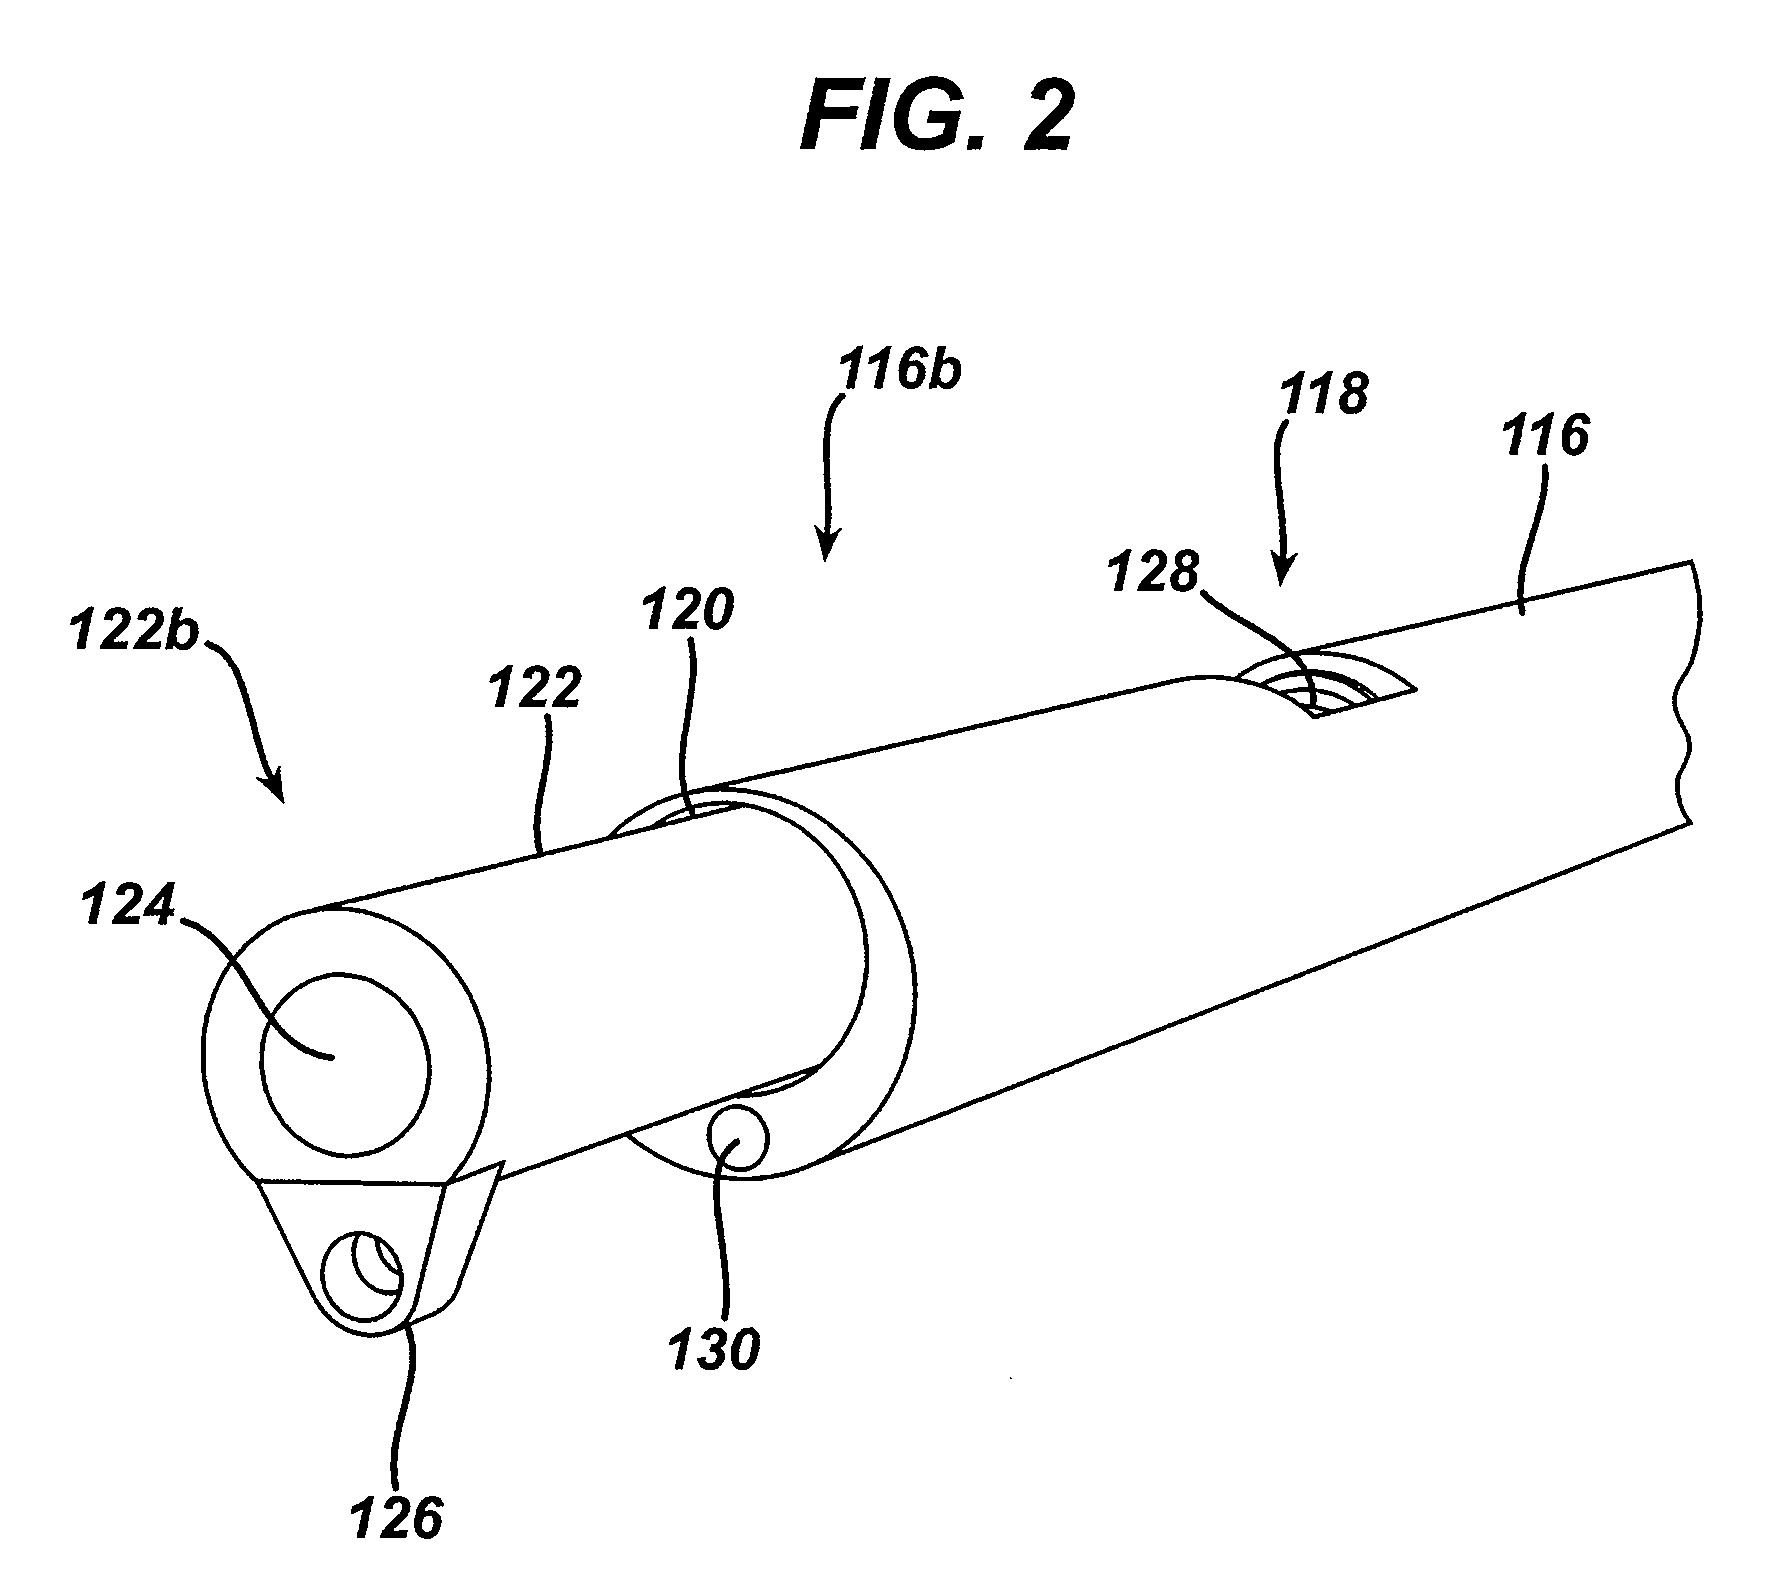 Endoscopic Tissue Resection Device